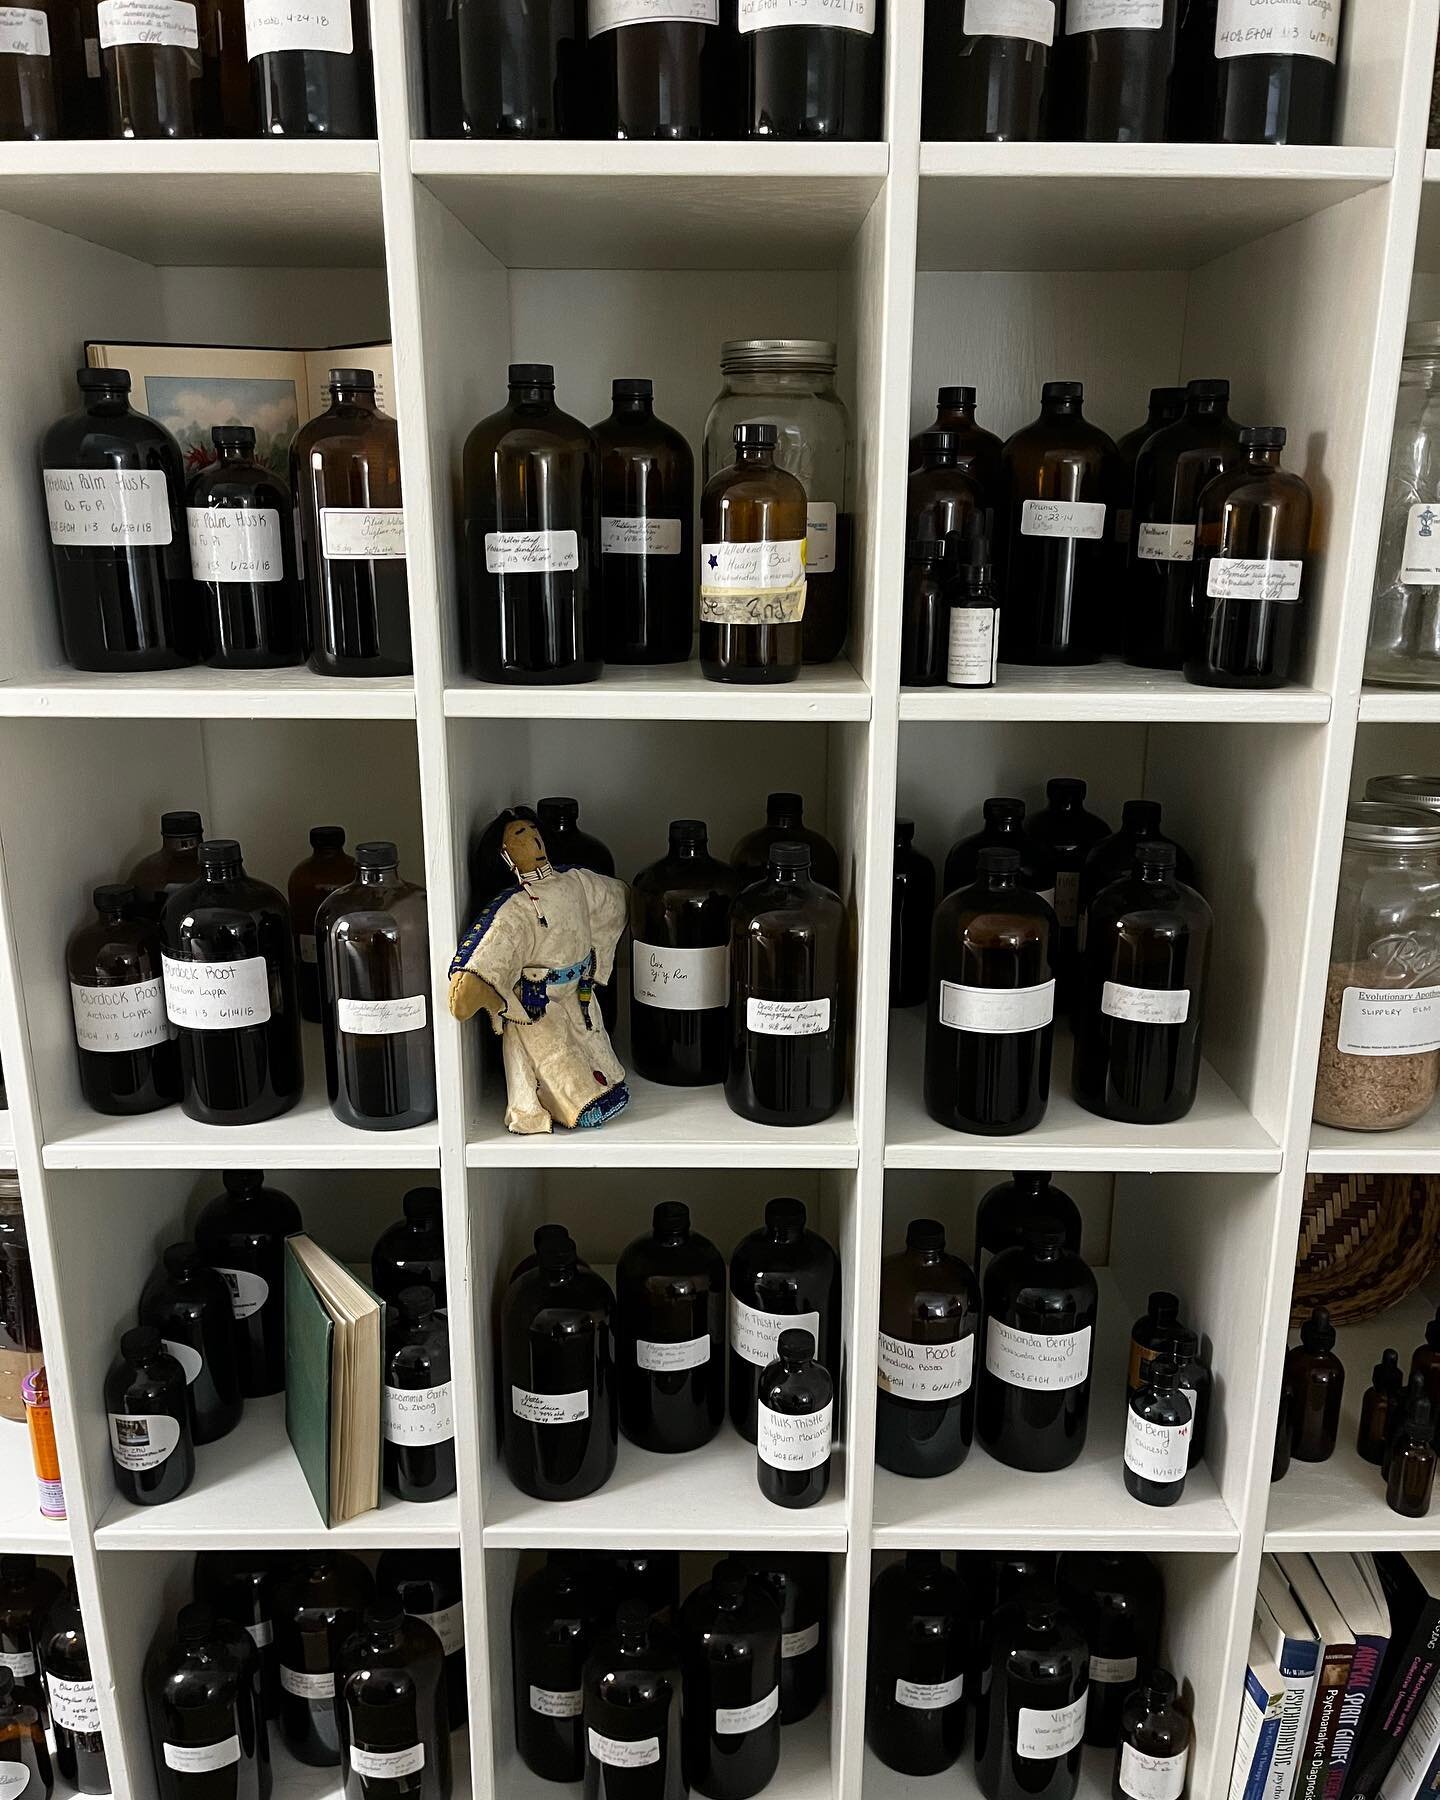 Apothecary vibes. We love it here.

Decolonizing mental health wholistically (yes I spelled it that way).

#decolonizetherapy #functionalherbology #sextherapy #psychotherapy #reiki #apothecary